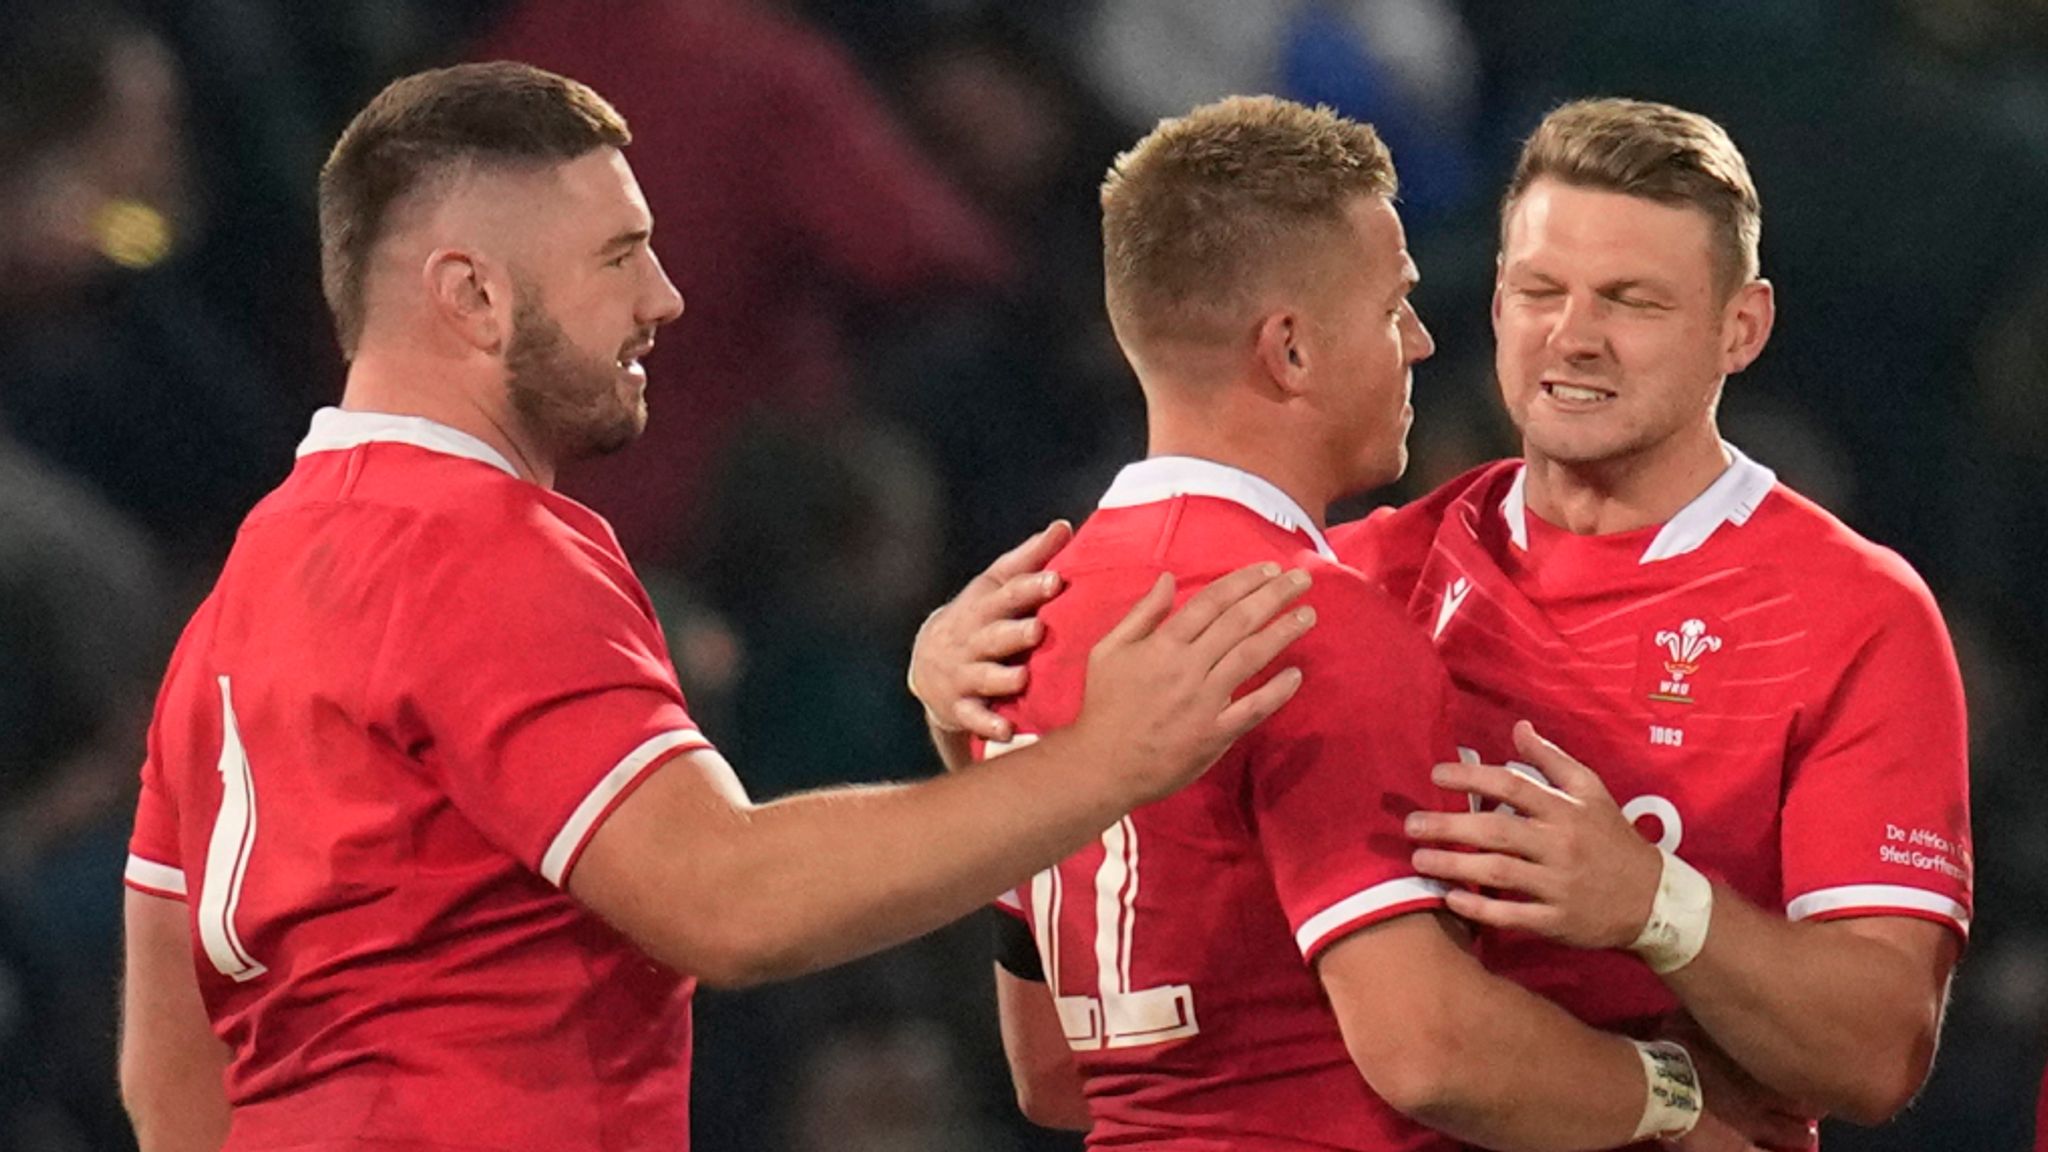 Dan Biggar Wales captain says 2023 Rugby World Cup will be very much a level playing field Rugby Union News Sky Sports